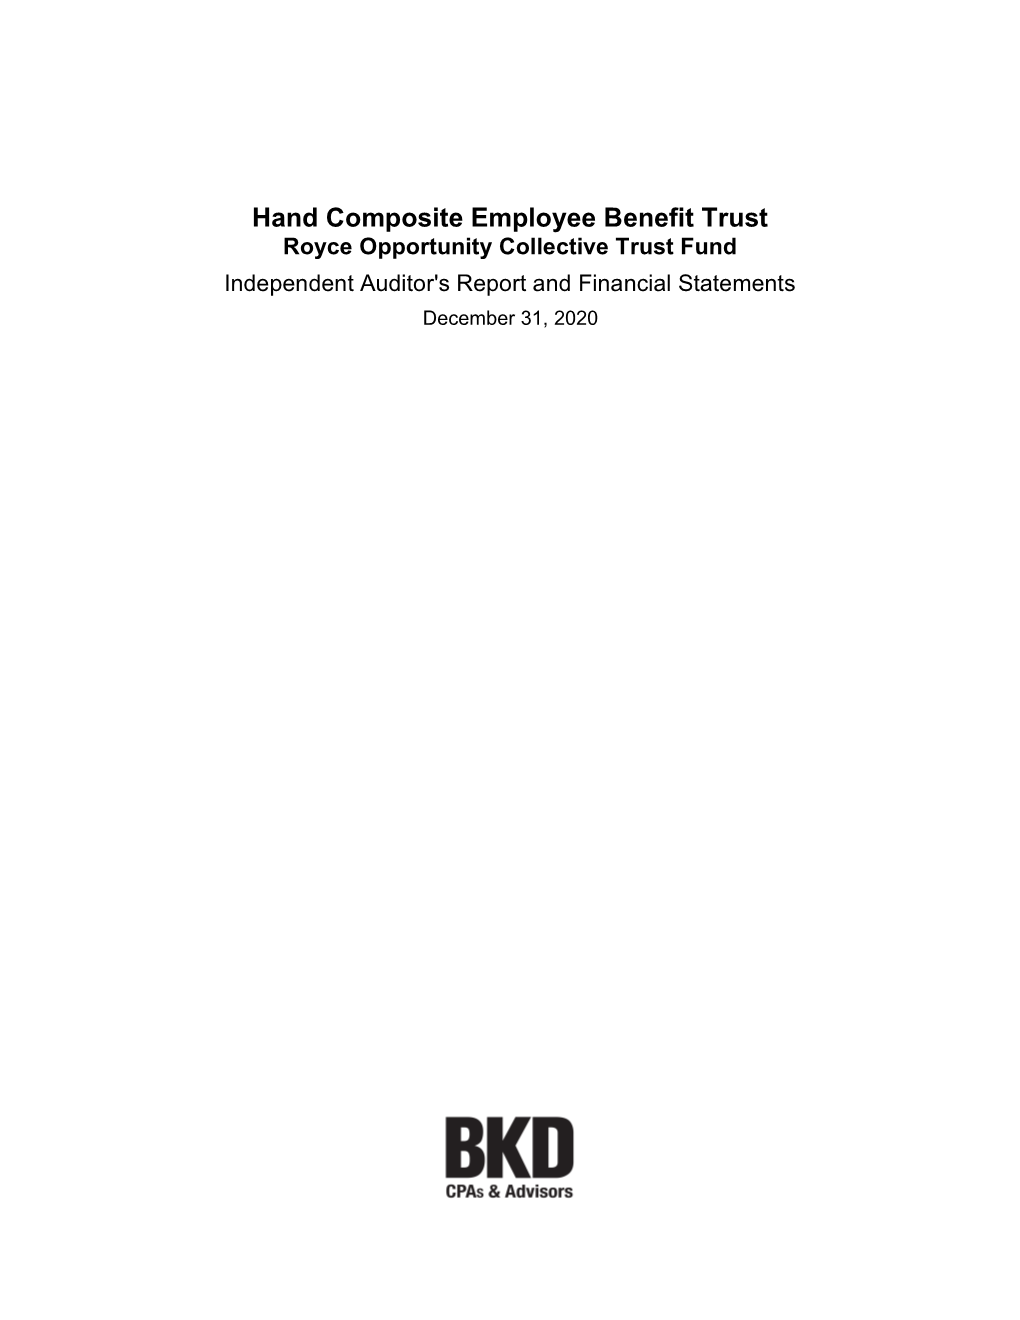 Hand Composite Employee Benefit Trust Royce Opportunity Collective Trust Fund Independent Auditor's Report and Financial Statements December 31, 2020